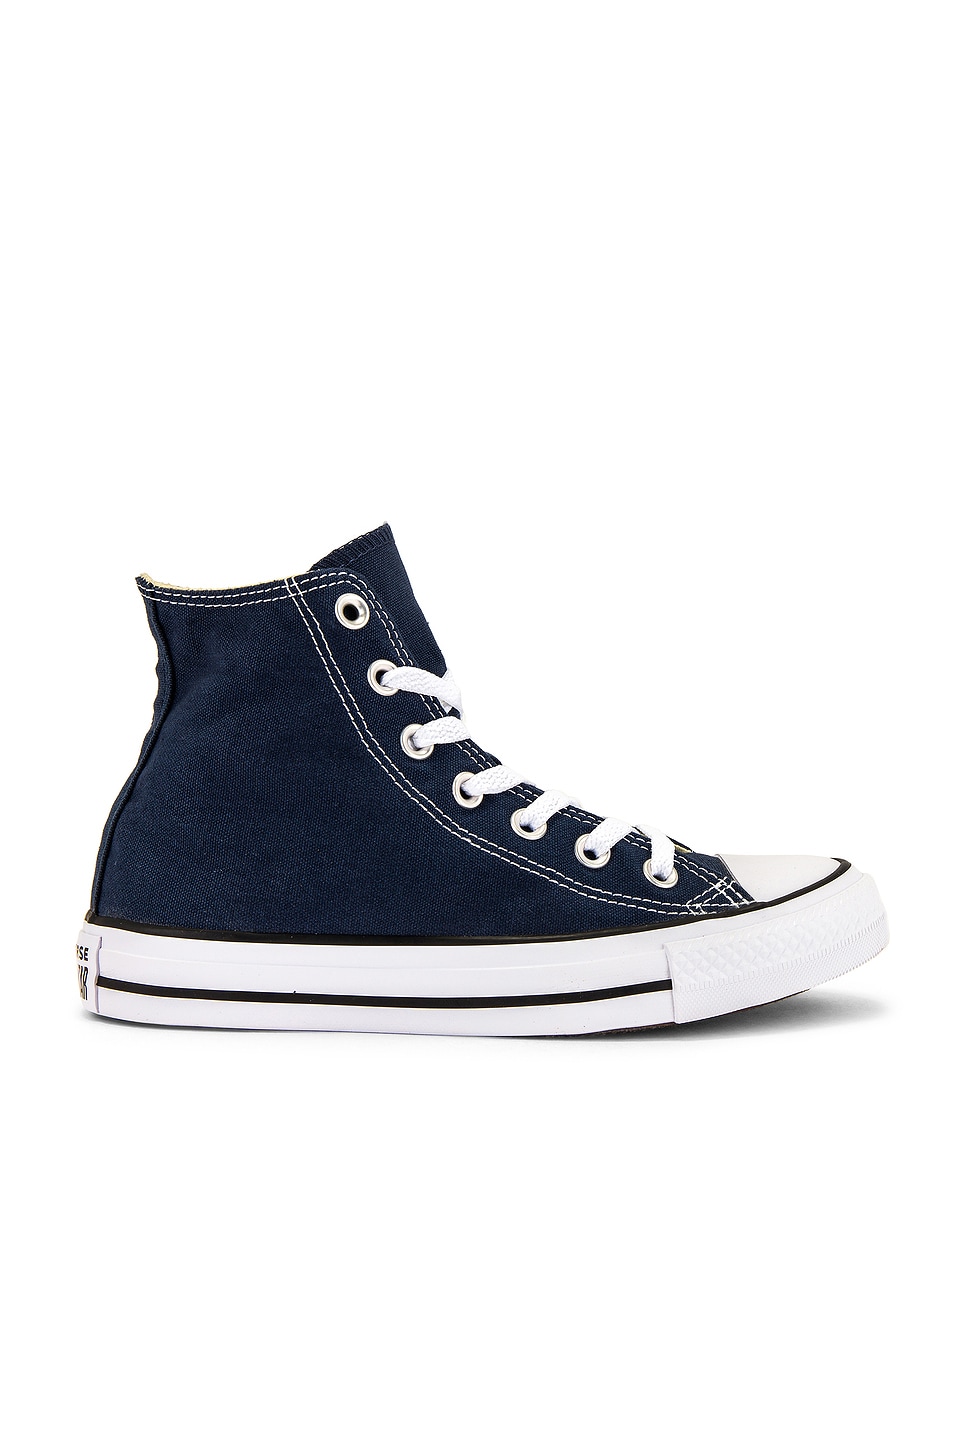 Image 1 of Converse Chuck Taylor All Star Hi Sneaker in Navy